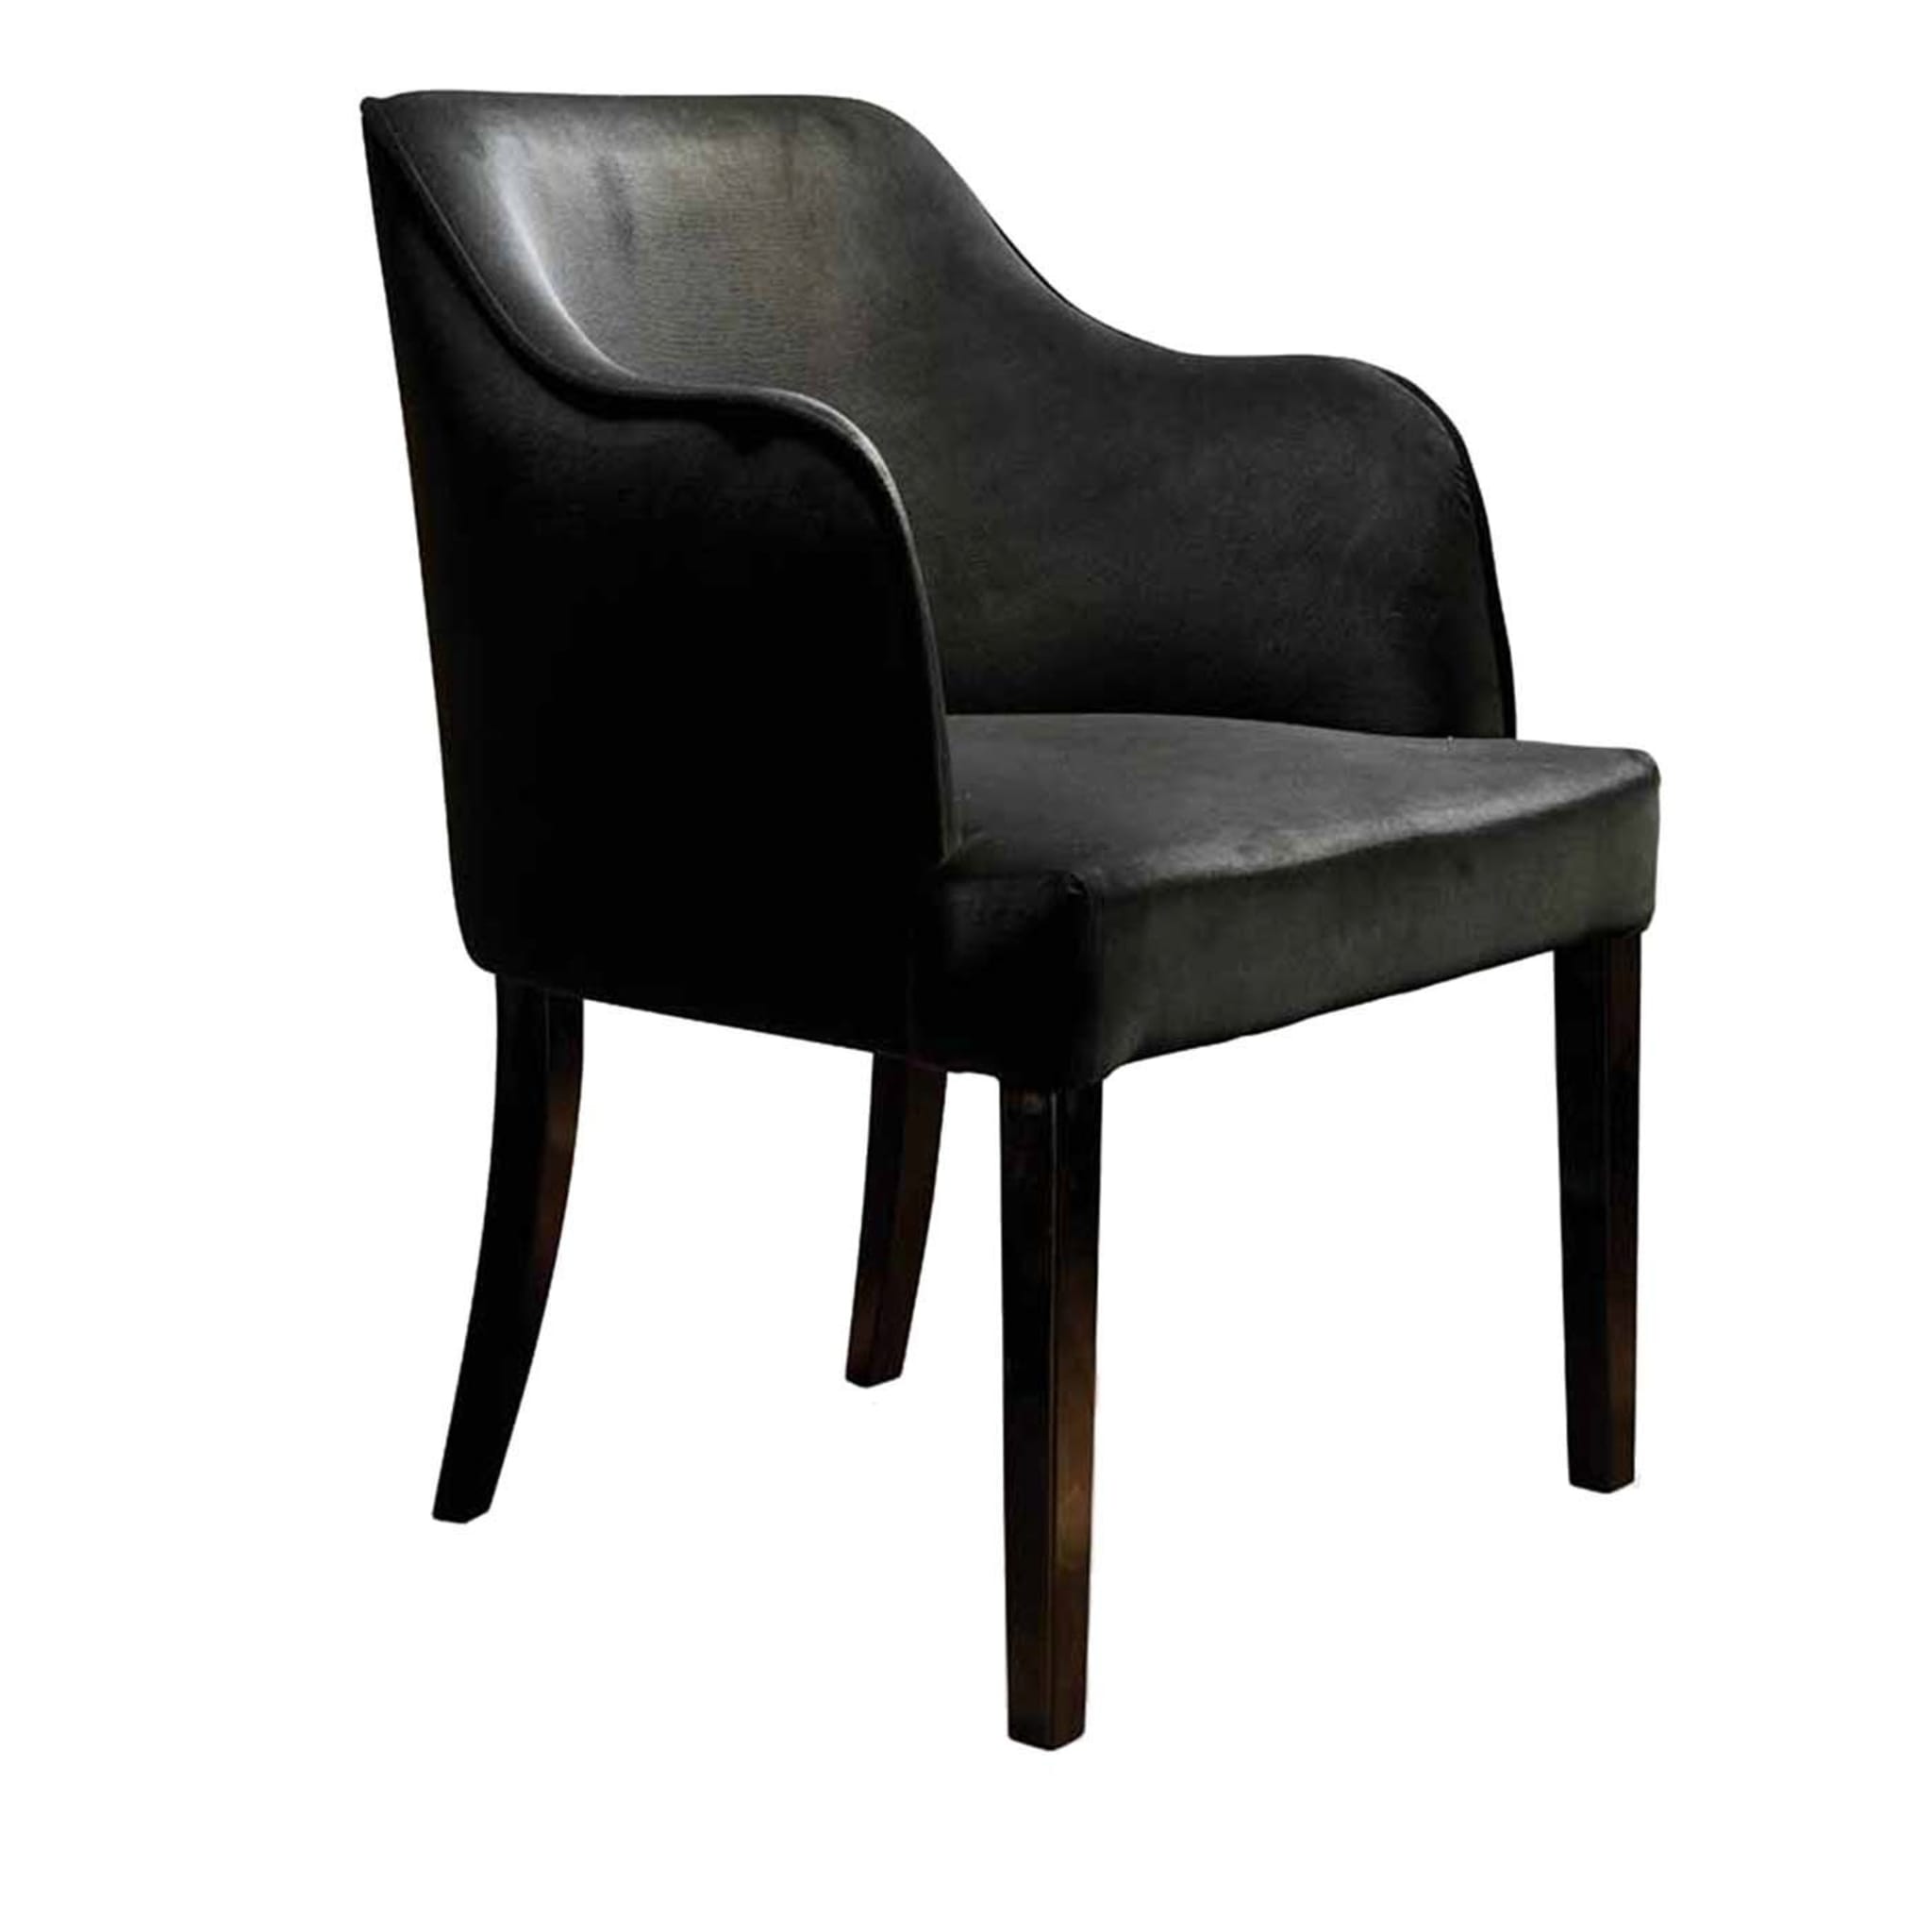 Vicky Black Dining Chair - Main view